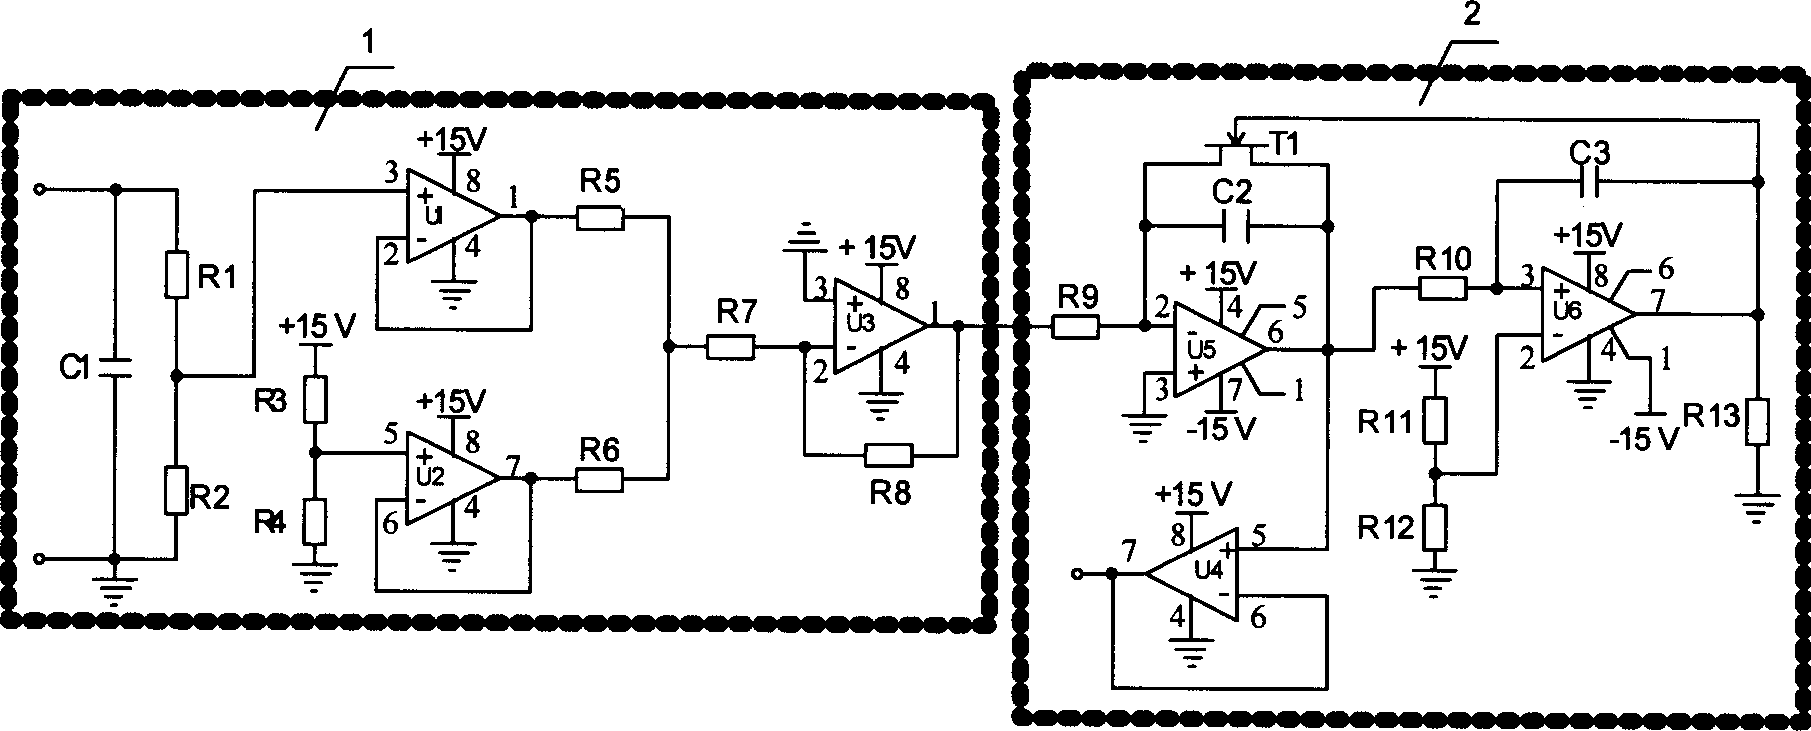 Switching frequency period modulated sawteeth wave generating circuit